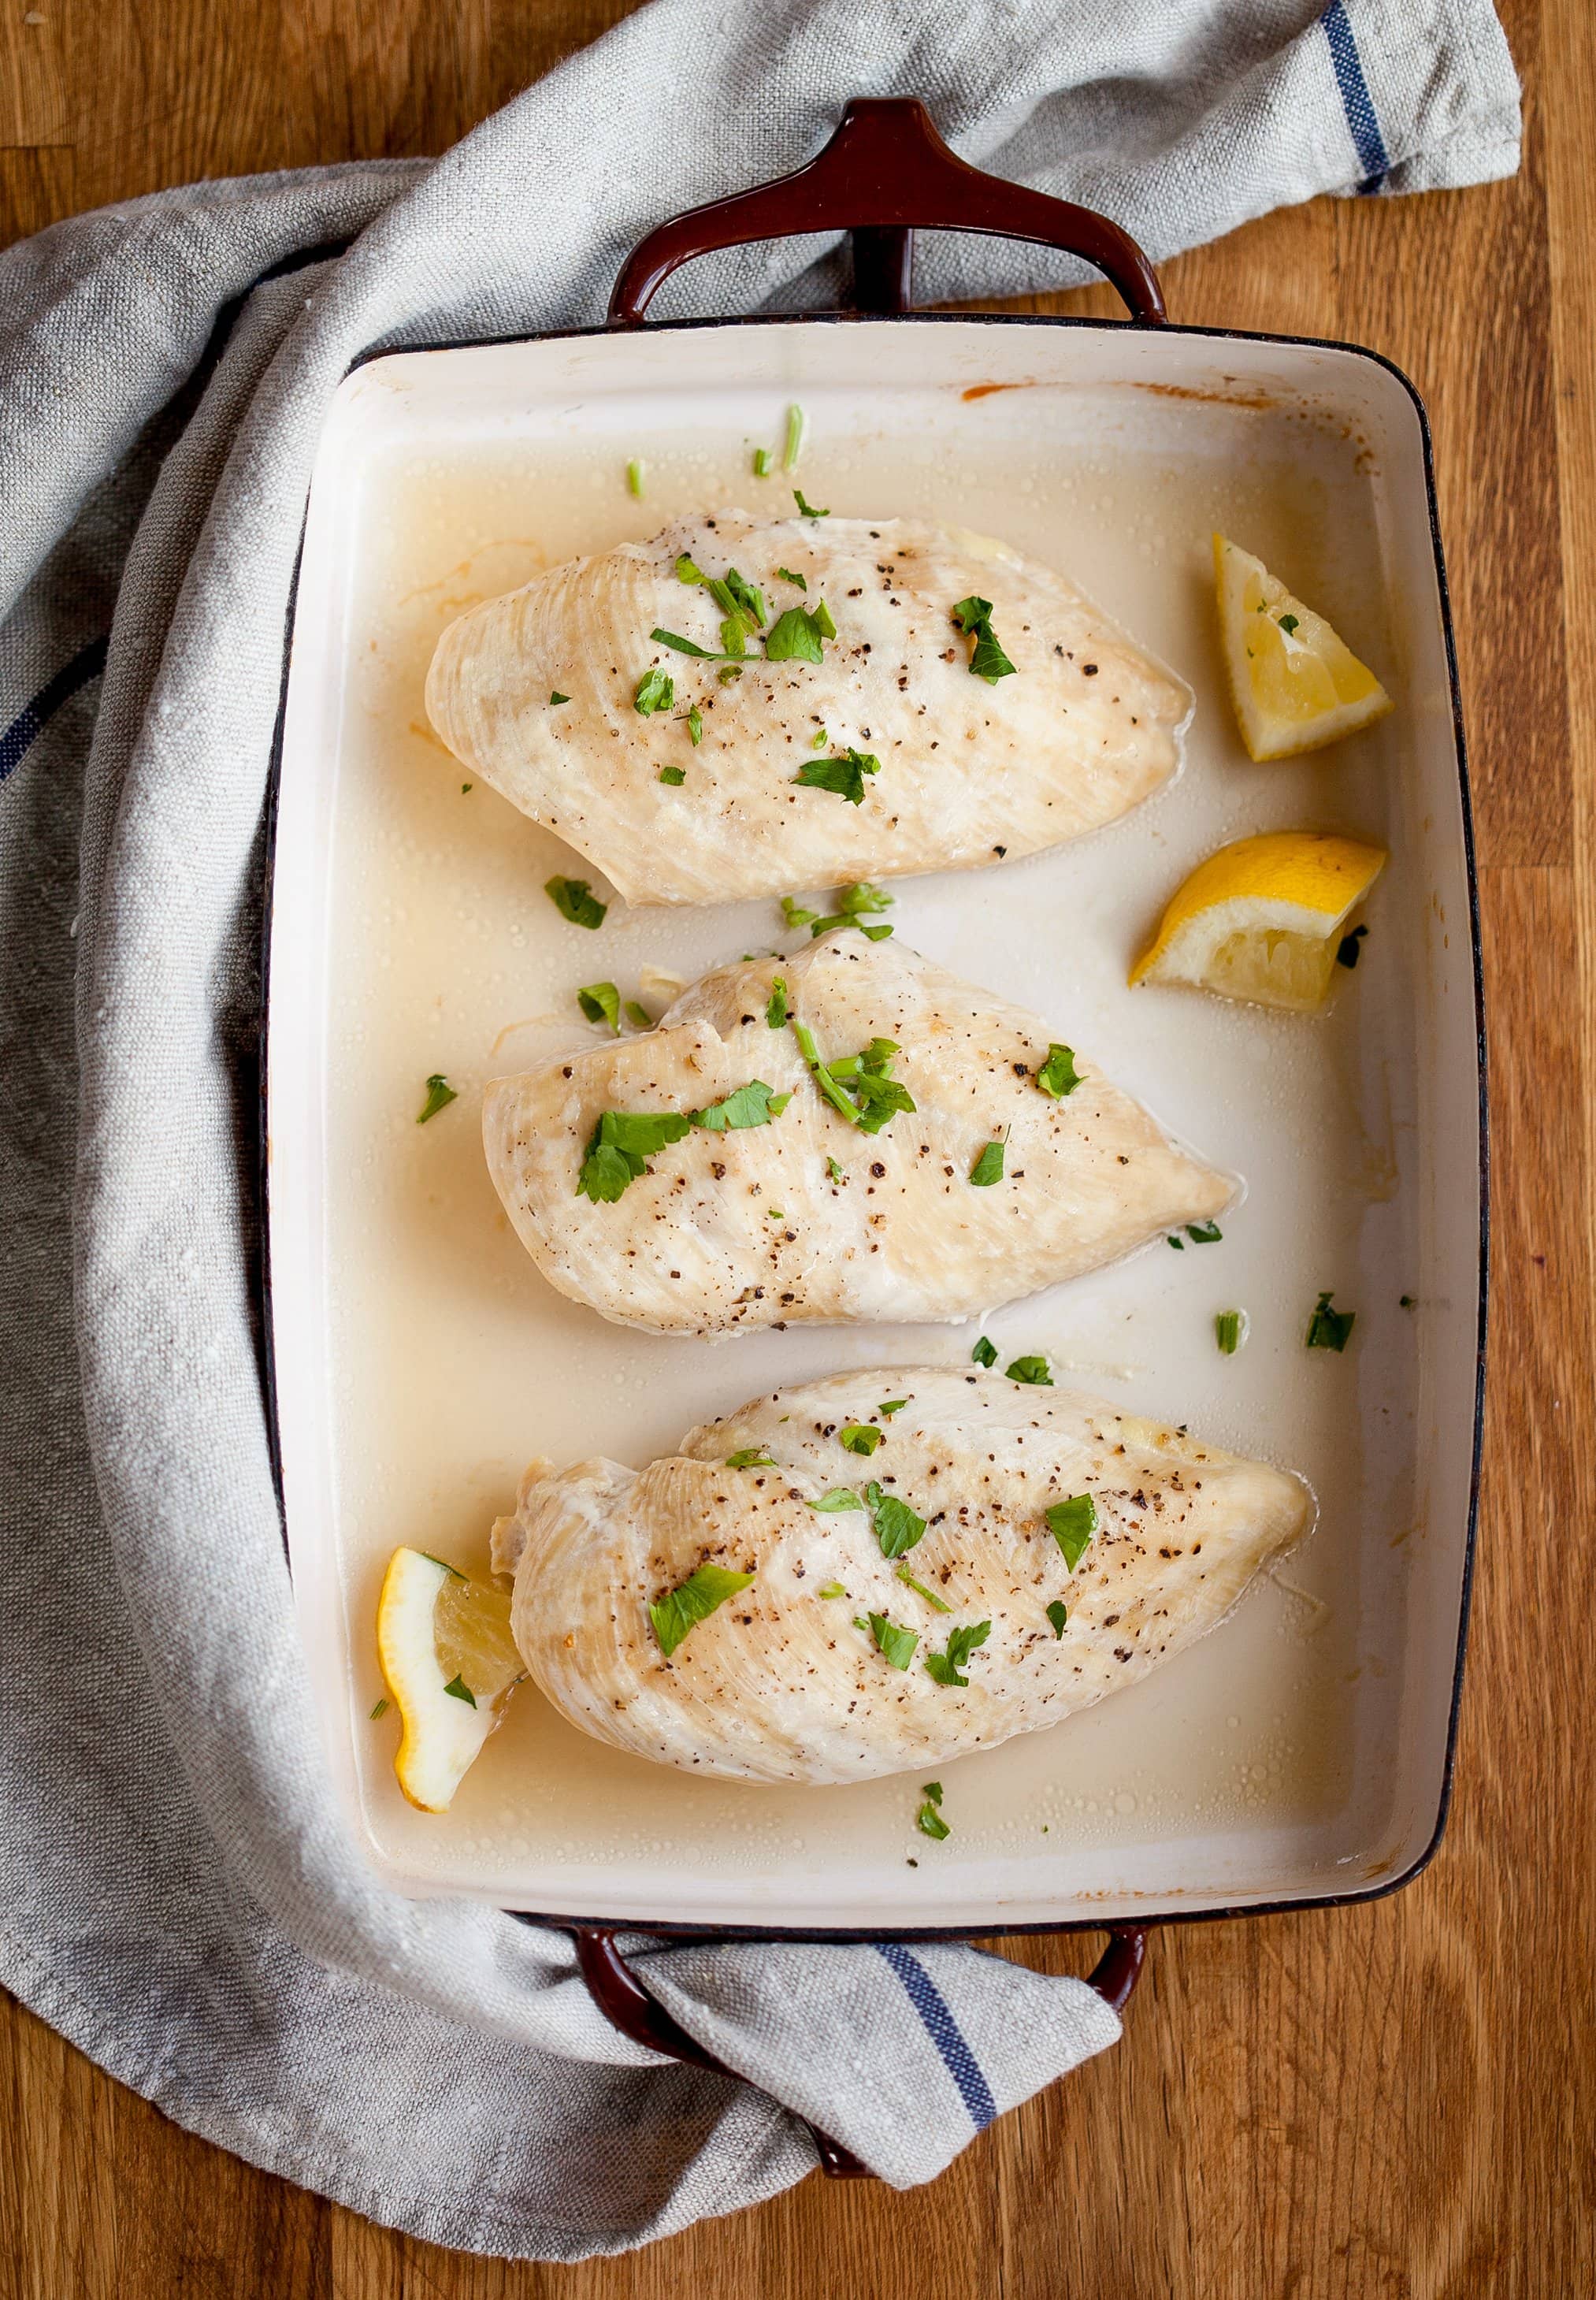 How To Bake Chicken Breasts In The Oven The Simplest Easiest Method Kitchn 